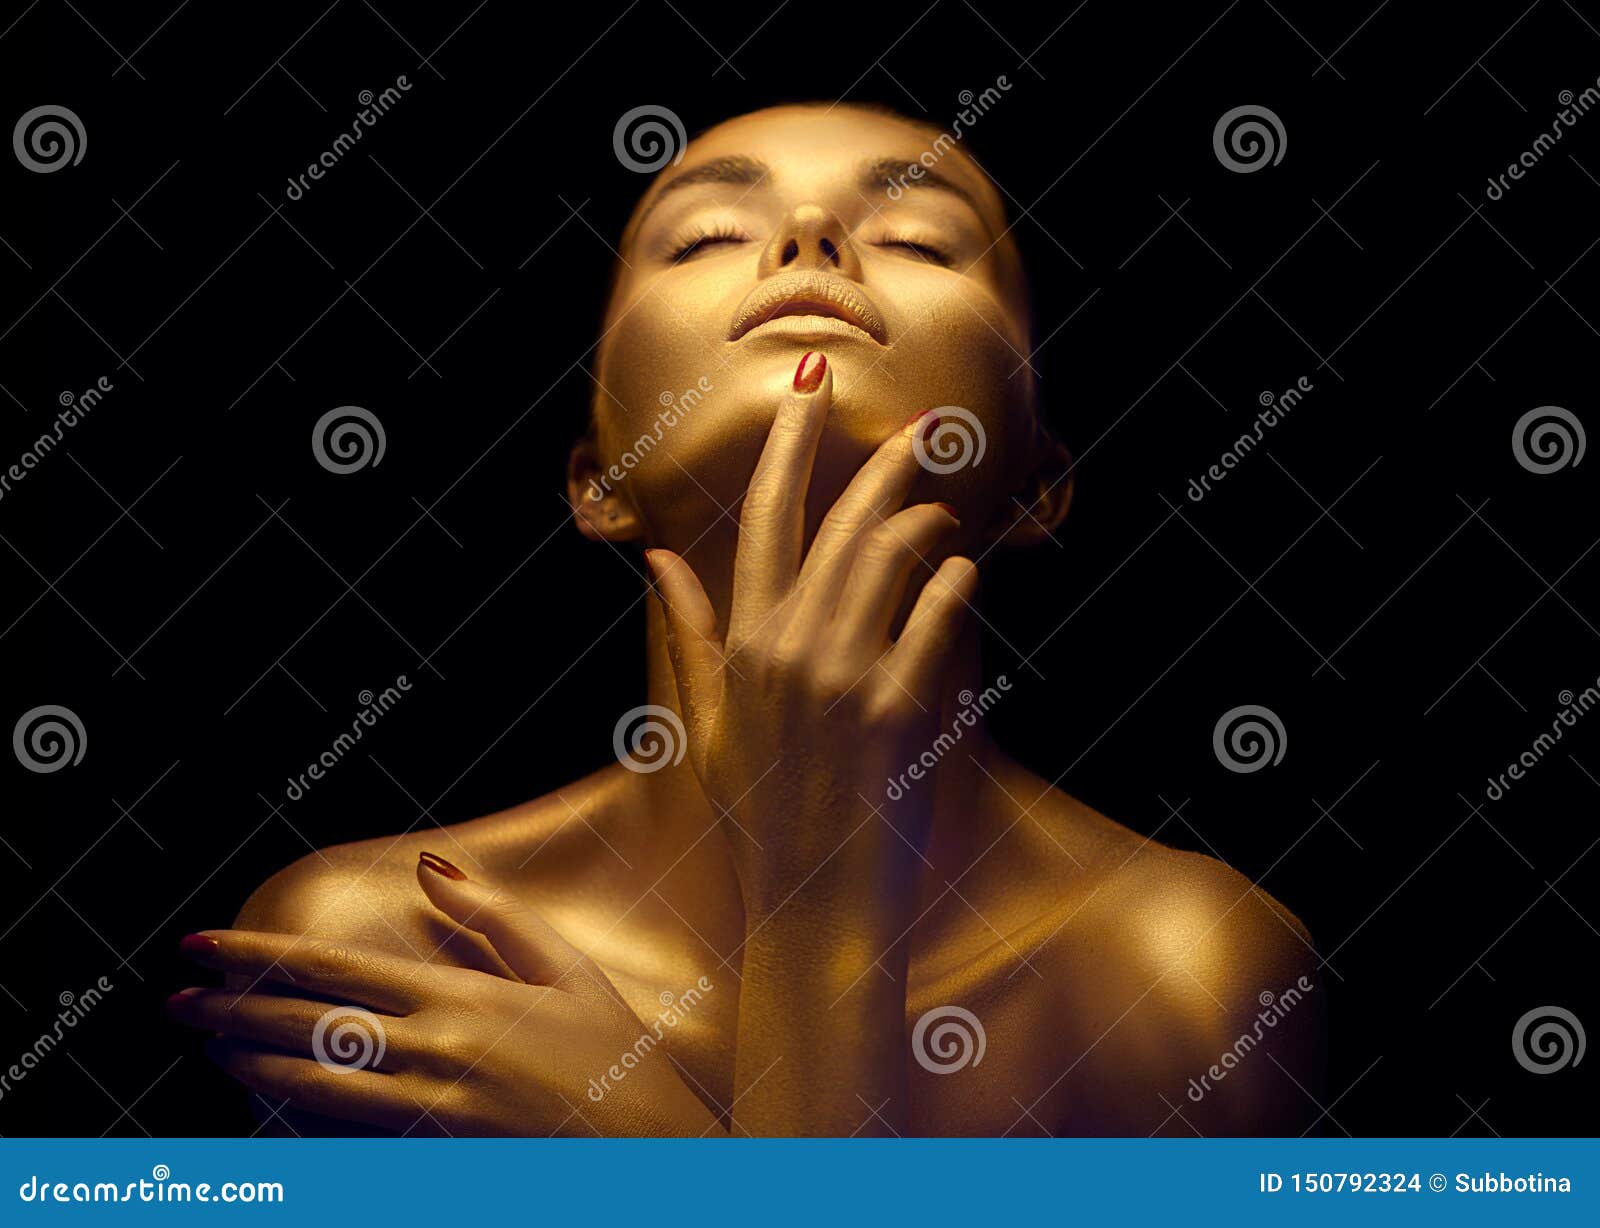 beauty sexy woman with golden skin. fashion art portrait closeup. model girl with shiny golden professional makeup